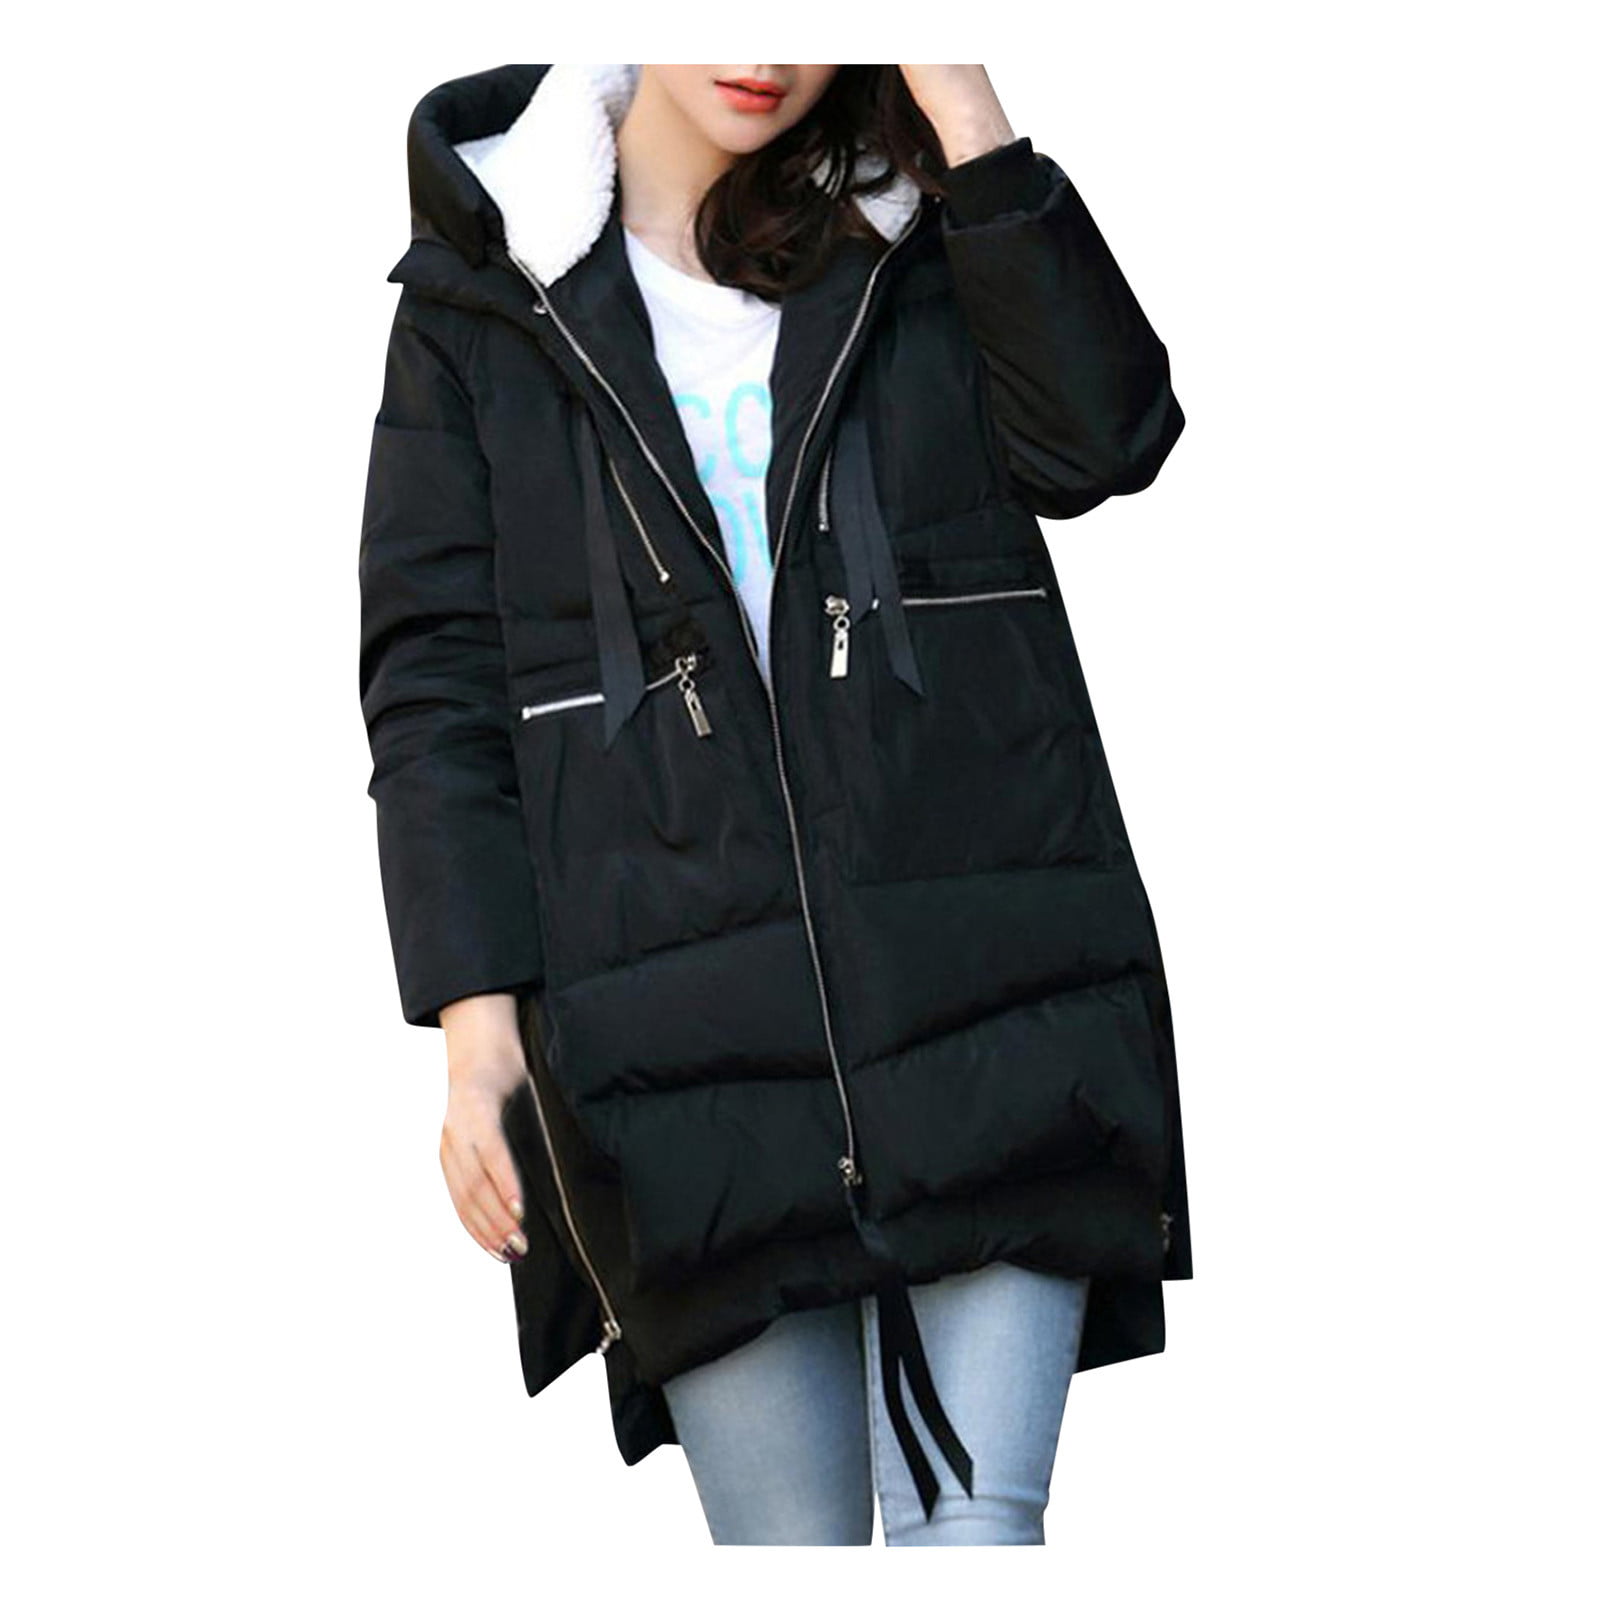 Suncolor8 Mens Fleece Lined Thick Hooded Outdoor Winter Parka Coat Jacket Outwear 